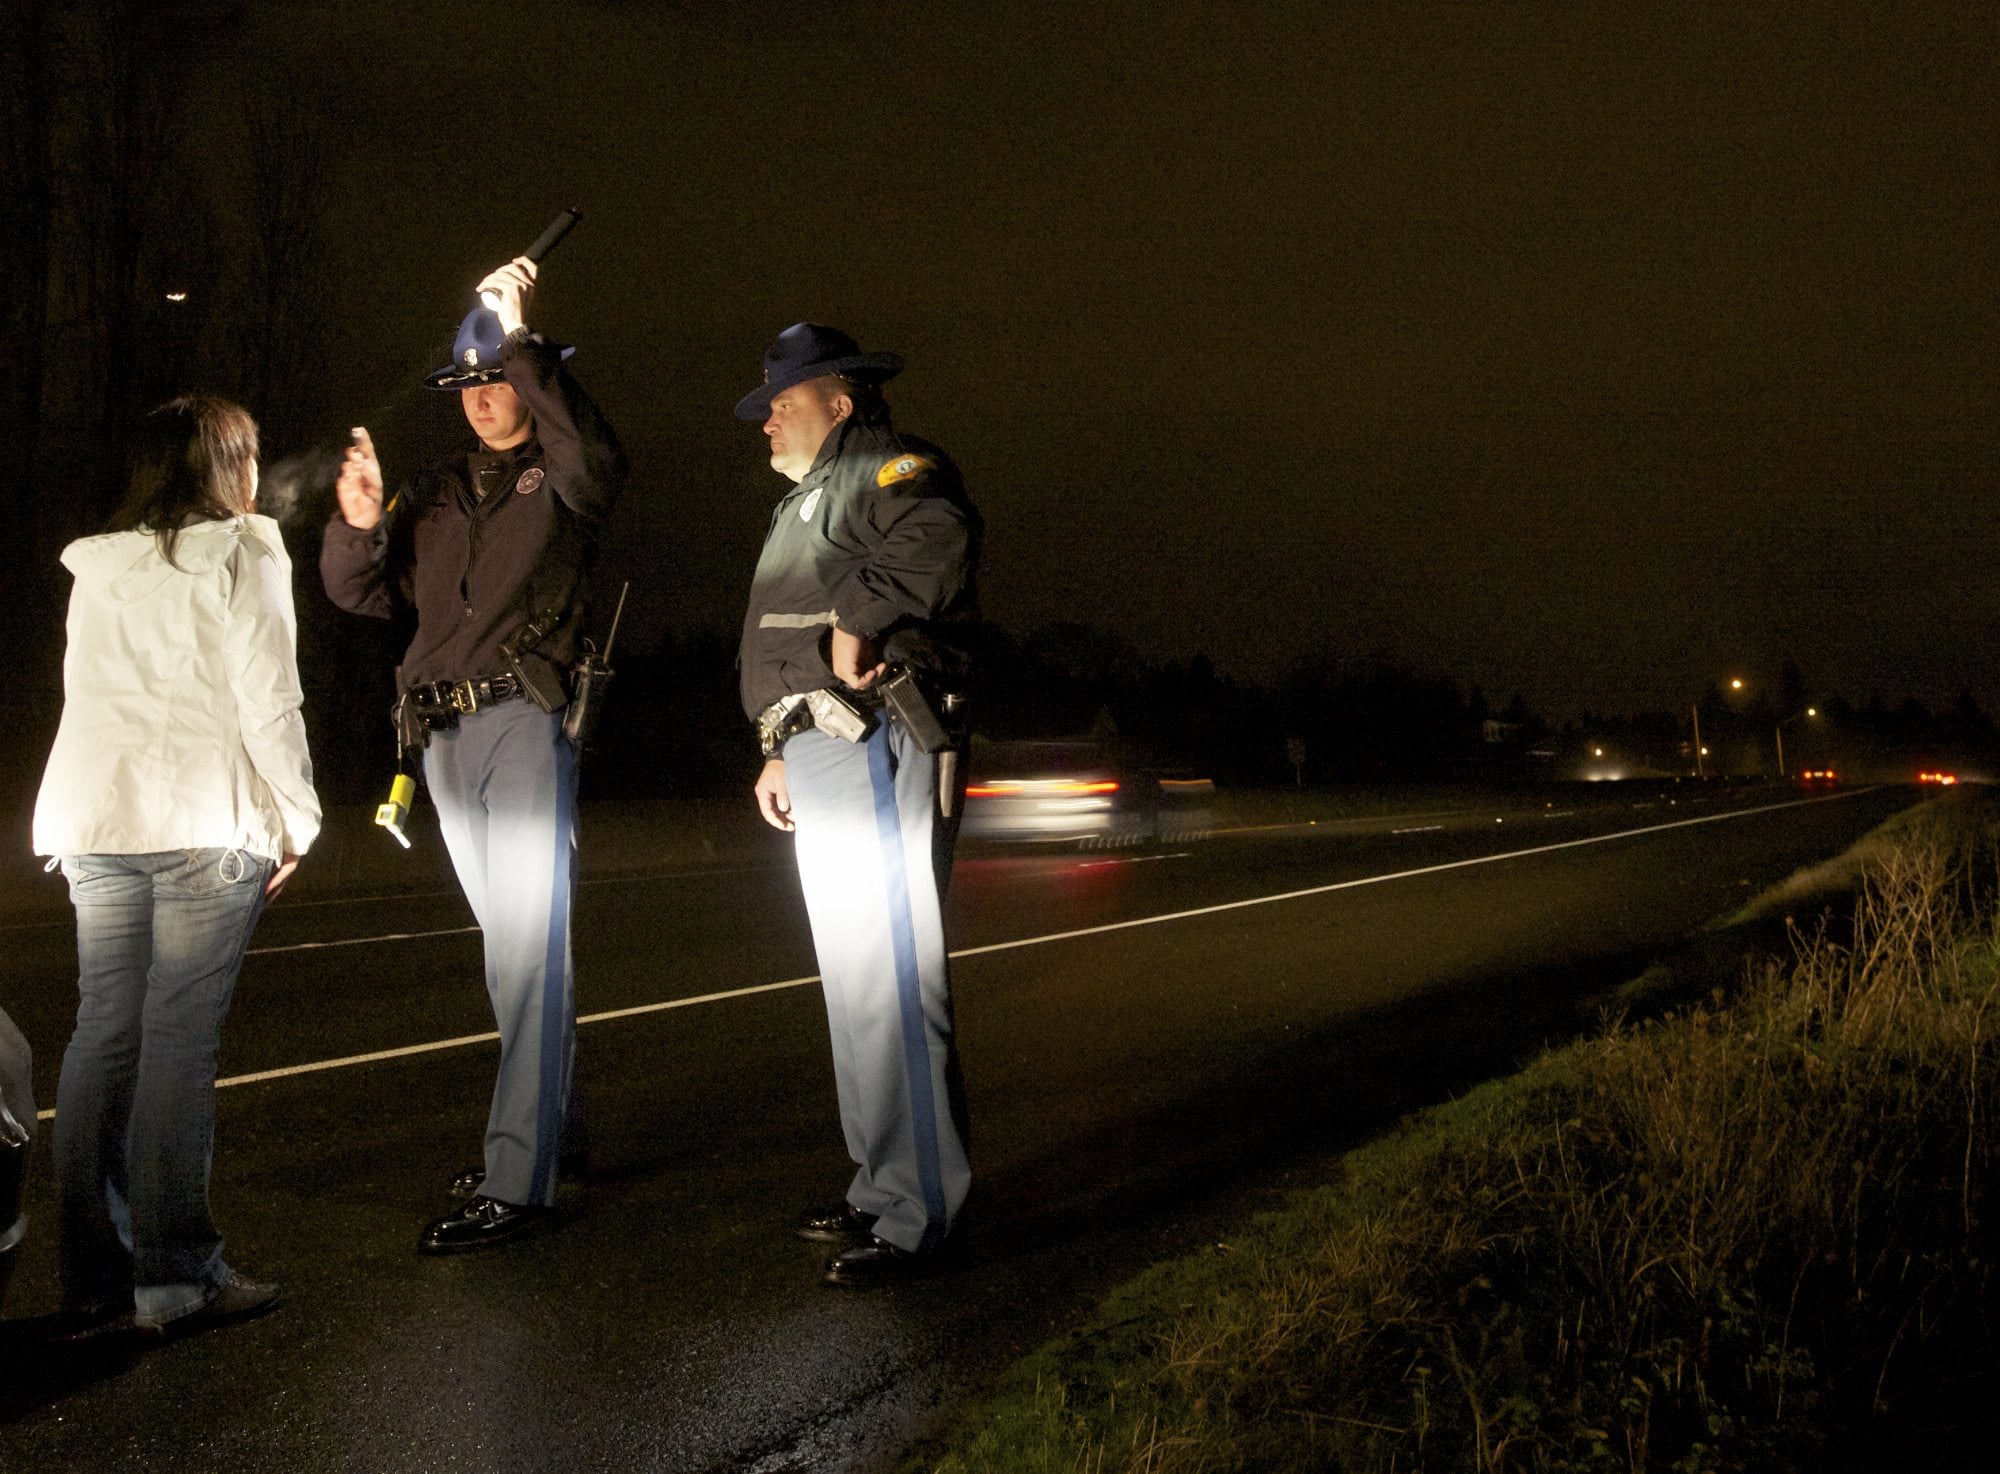 A Washington State Patrol cadet , center, administers a field sobriety test on a suspected DUI stop under the supervision of Trooper Bennie Taylor on Highway 14 in Vancouver in 2012.